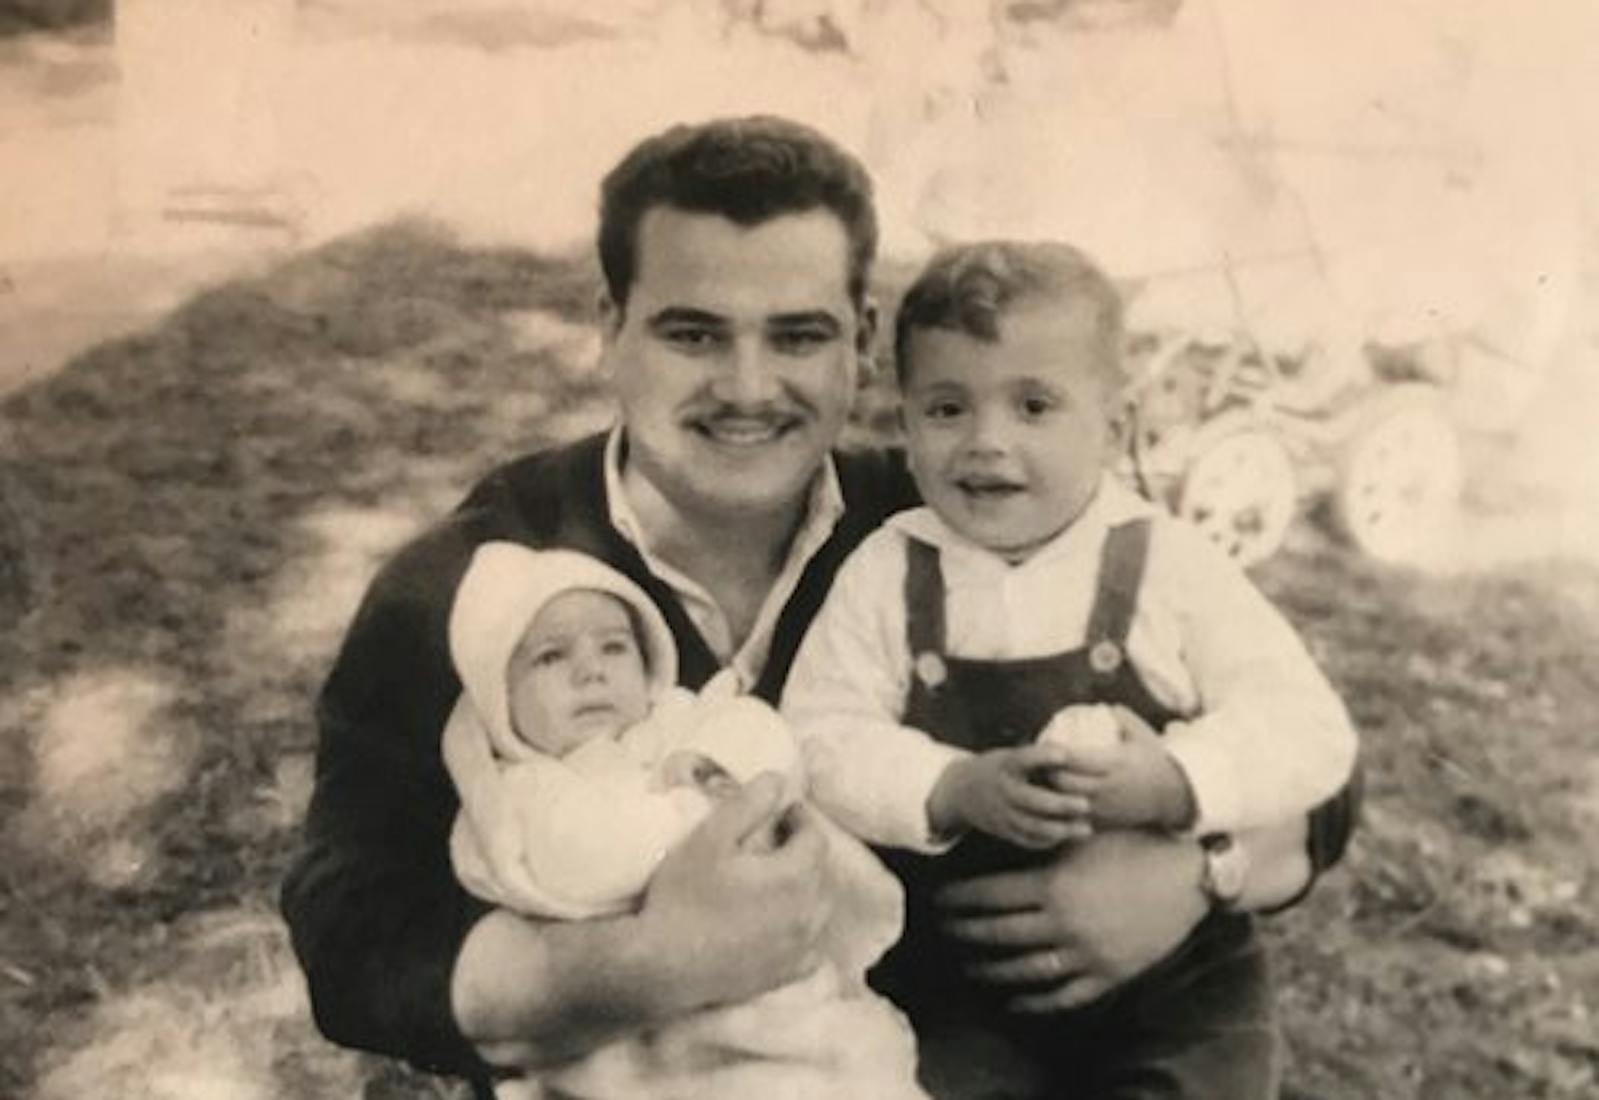 Tiffany's grandfather George Bellaiche with his children in Israel, 1960s.